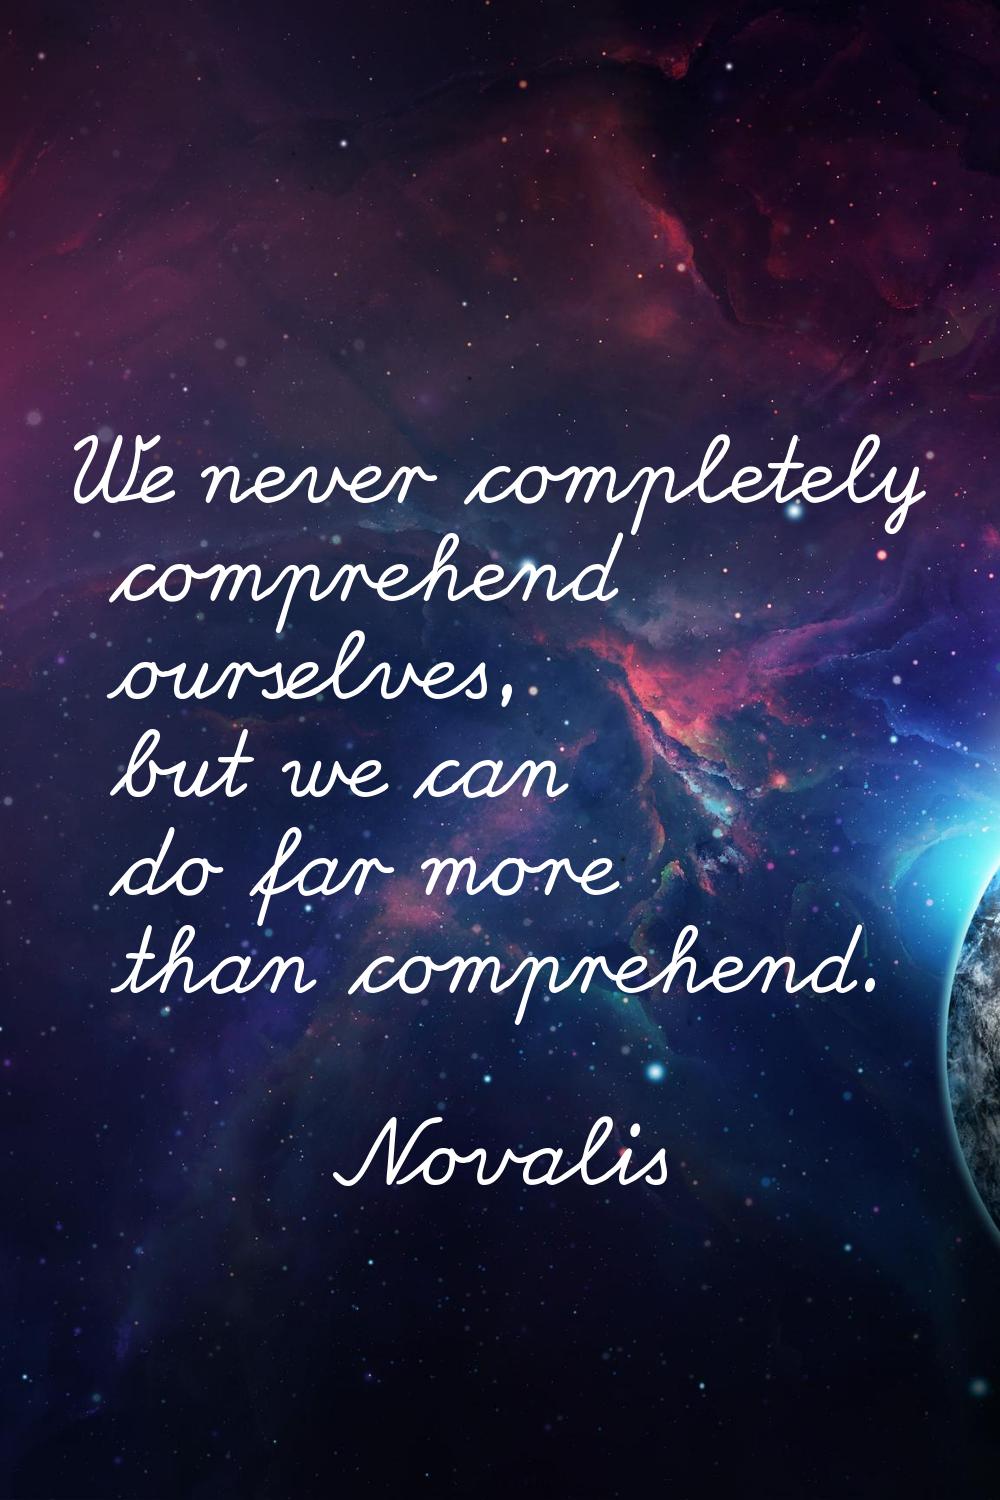 We never completely comprehend ourselves, but we can do far more than comprehend.